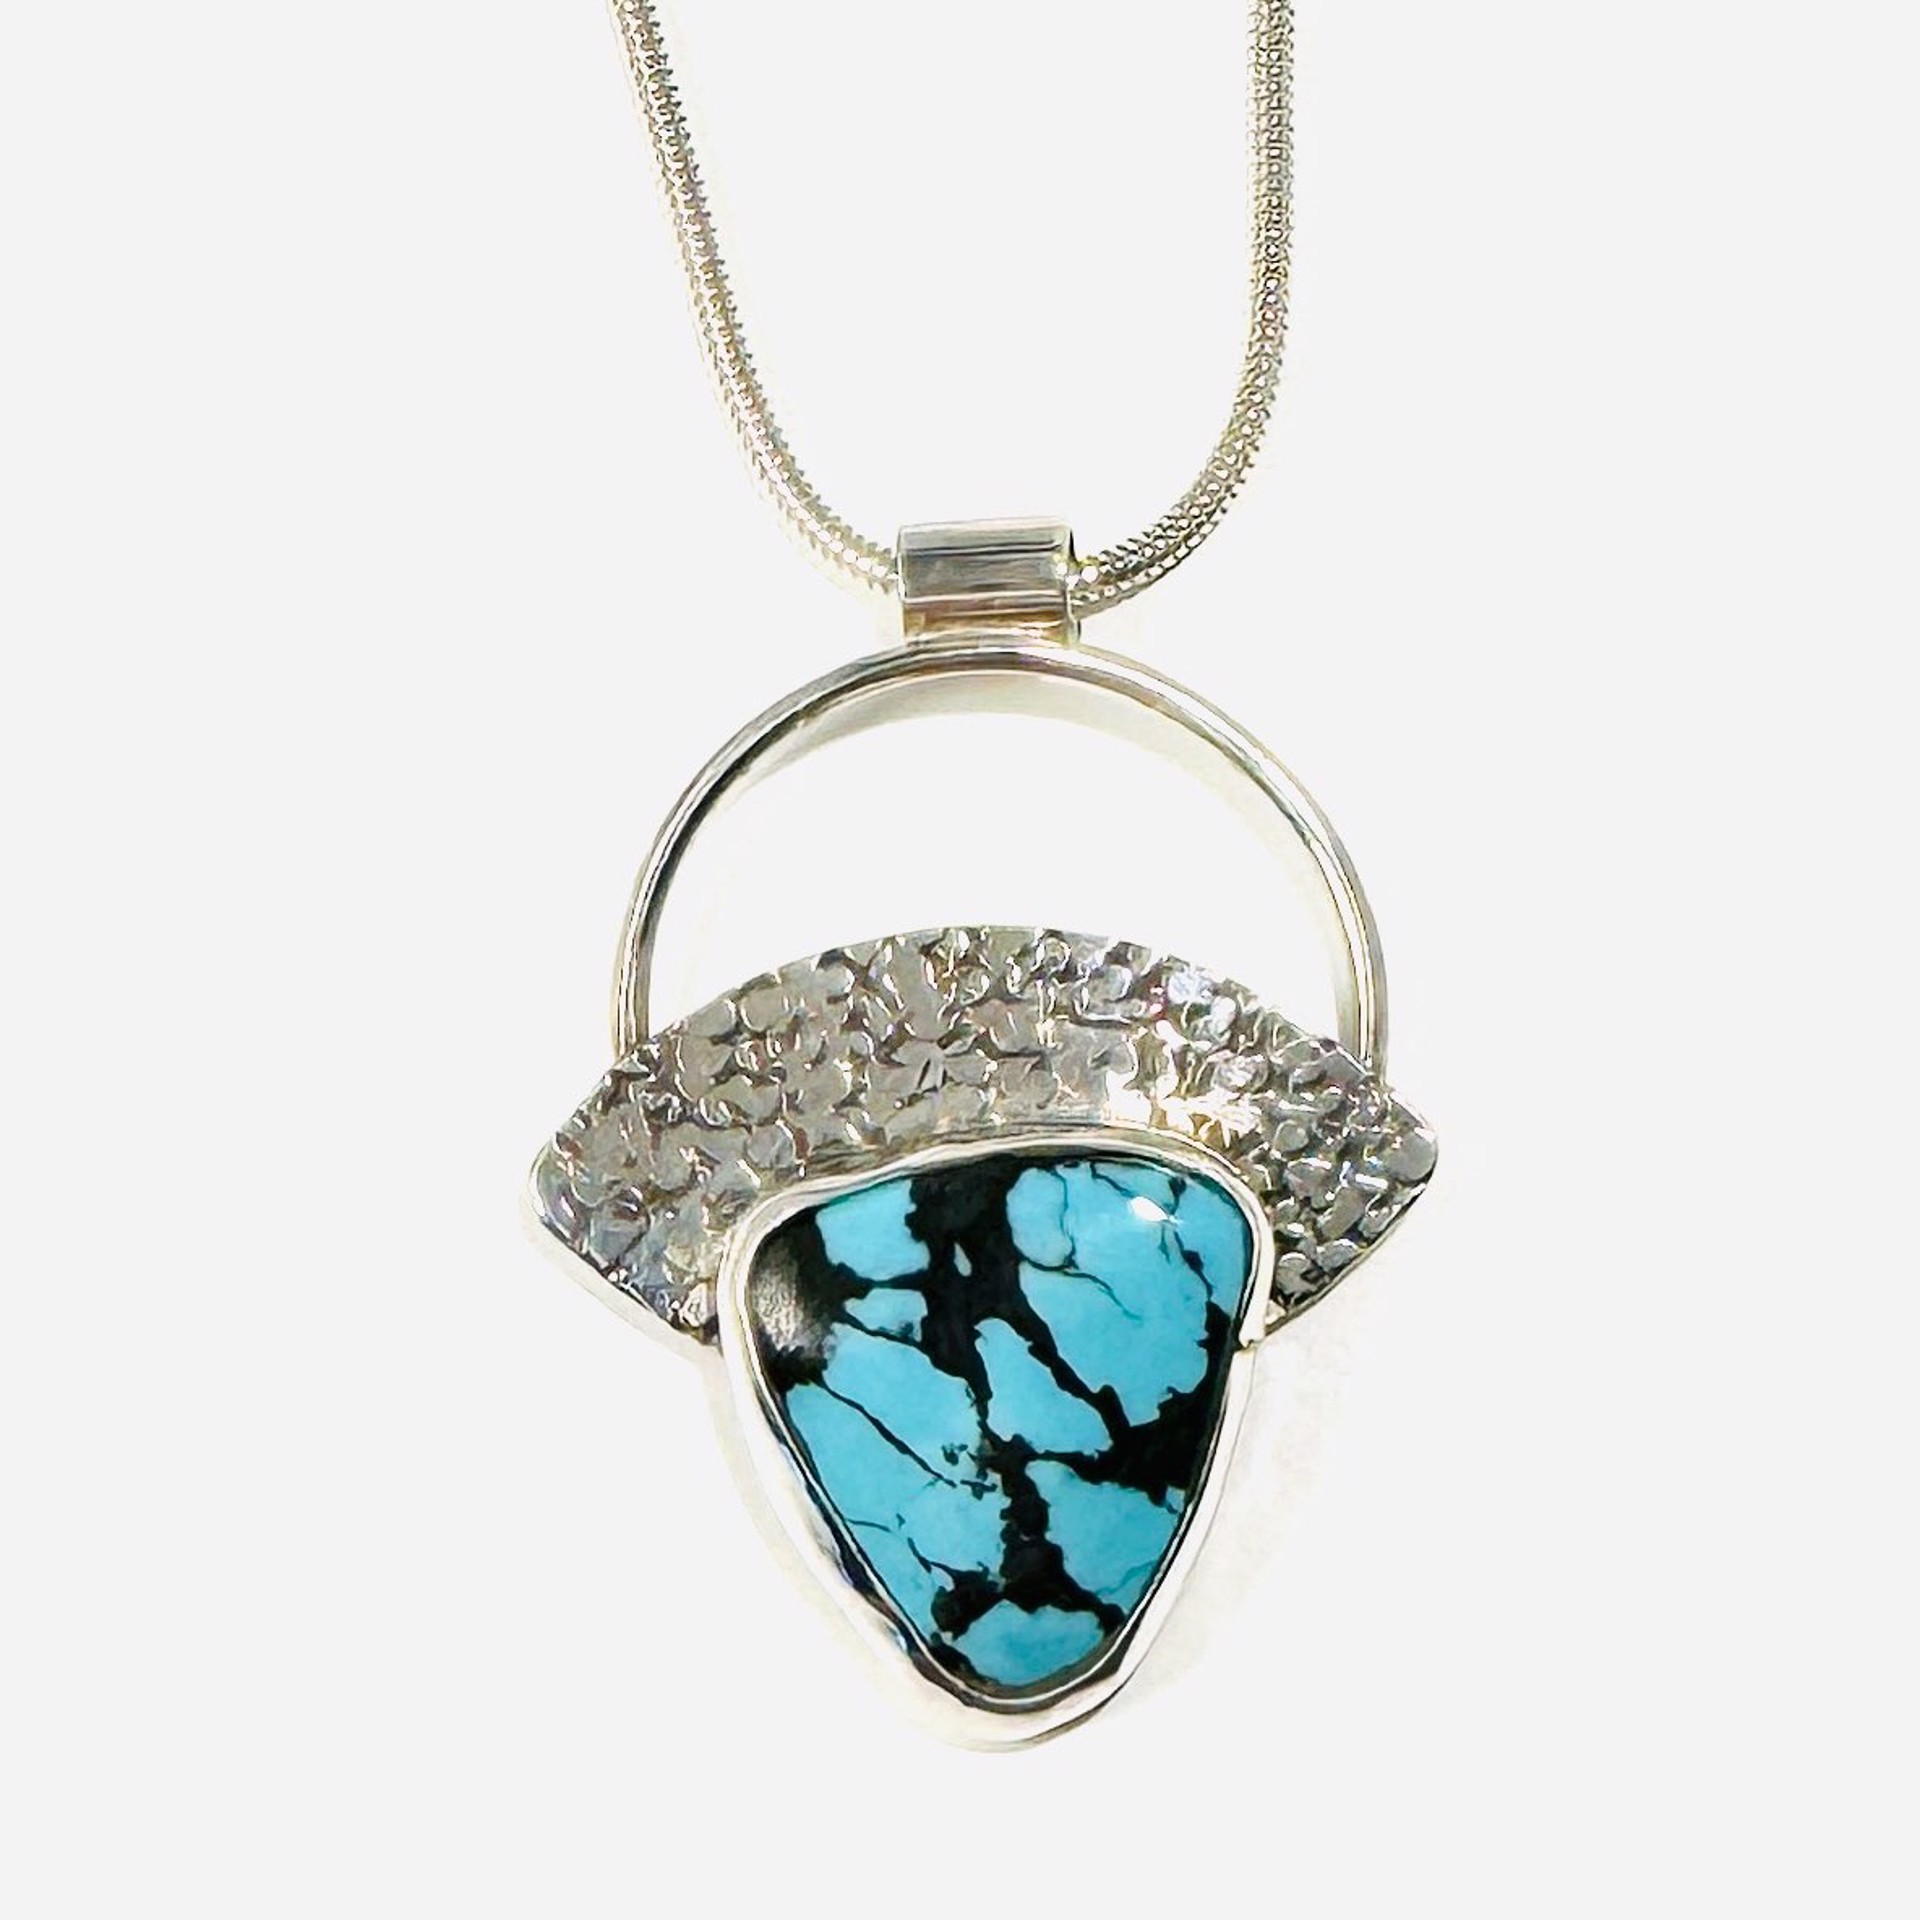 Hubei Turquoise Pendant on 18"snake chain AB23-117 by Anne Bivens